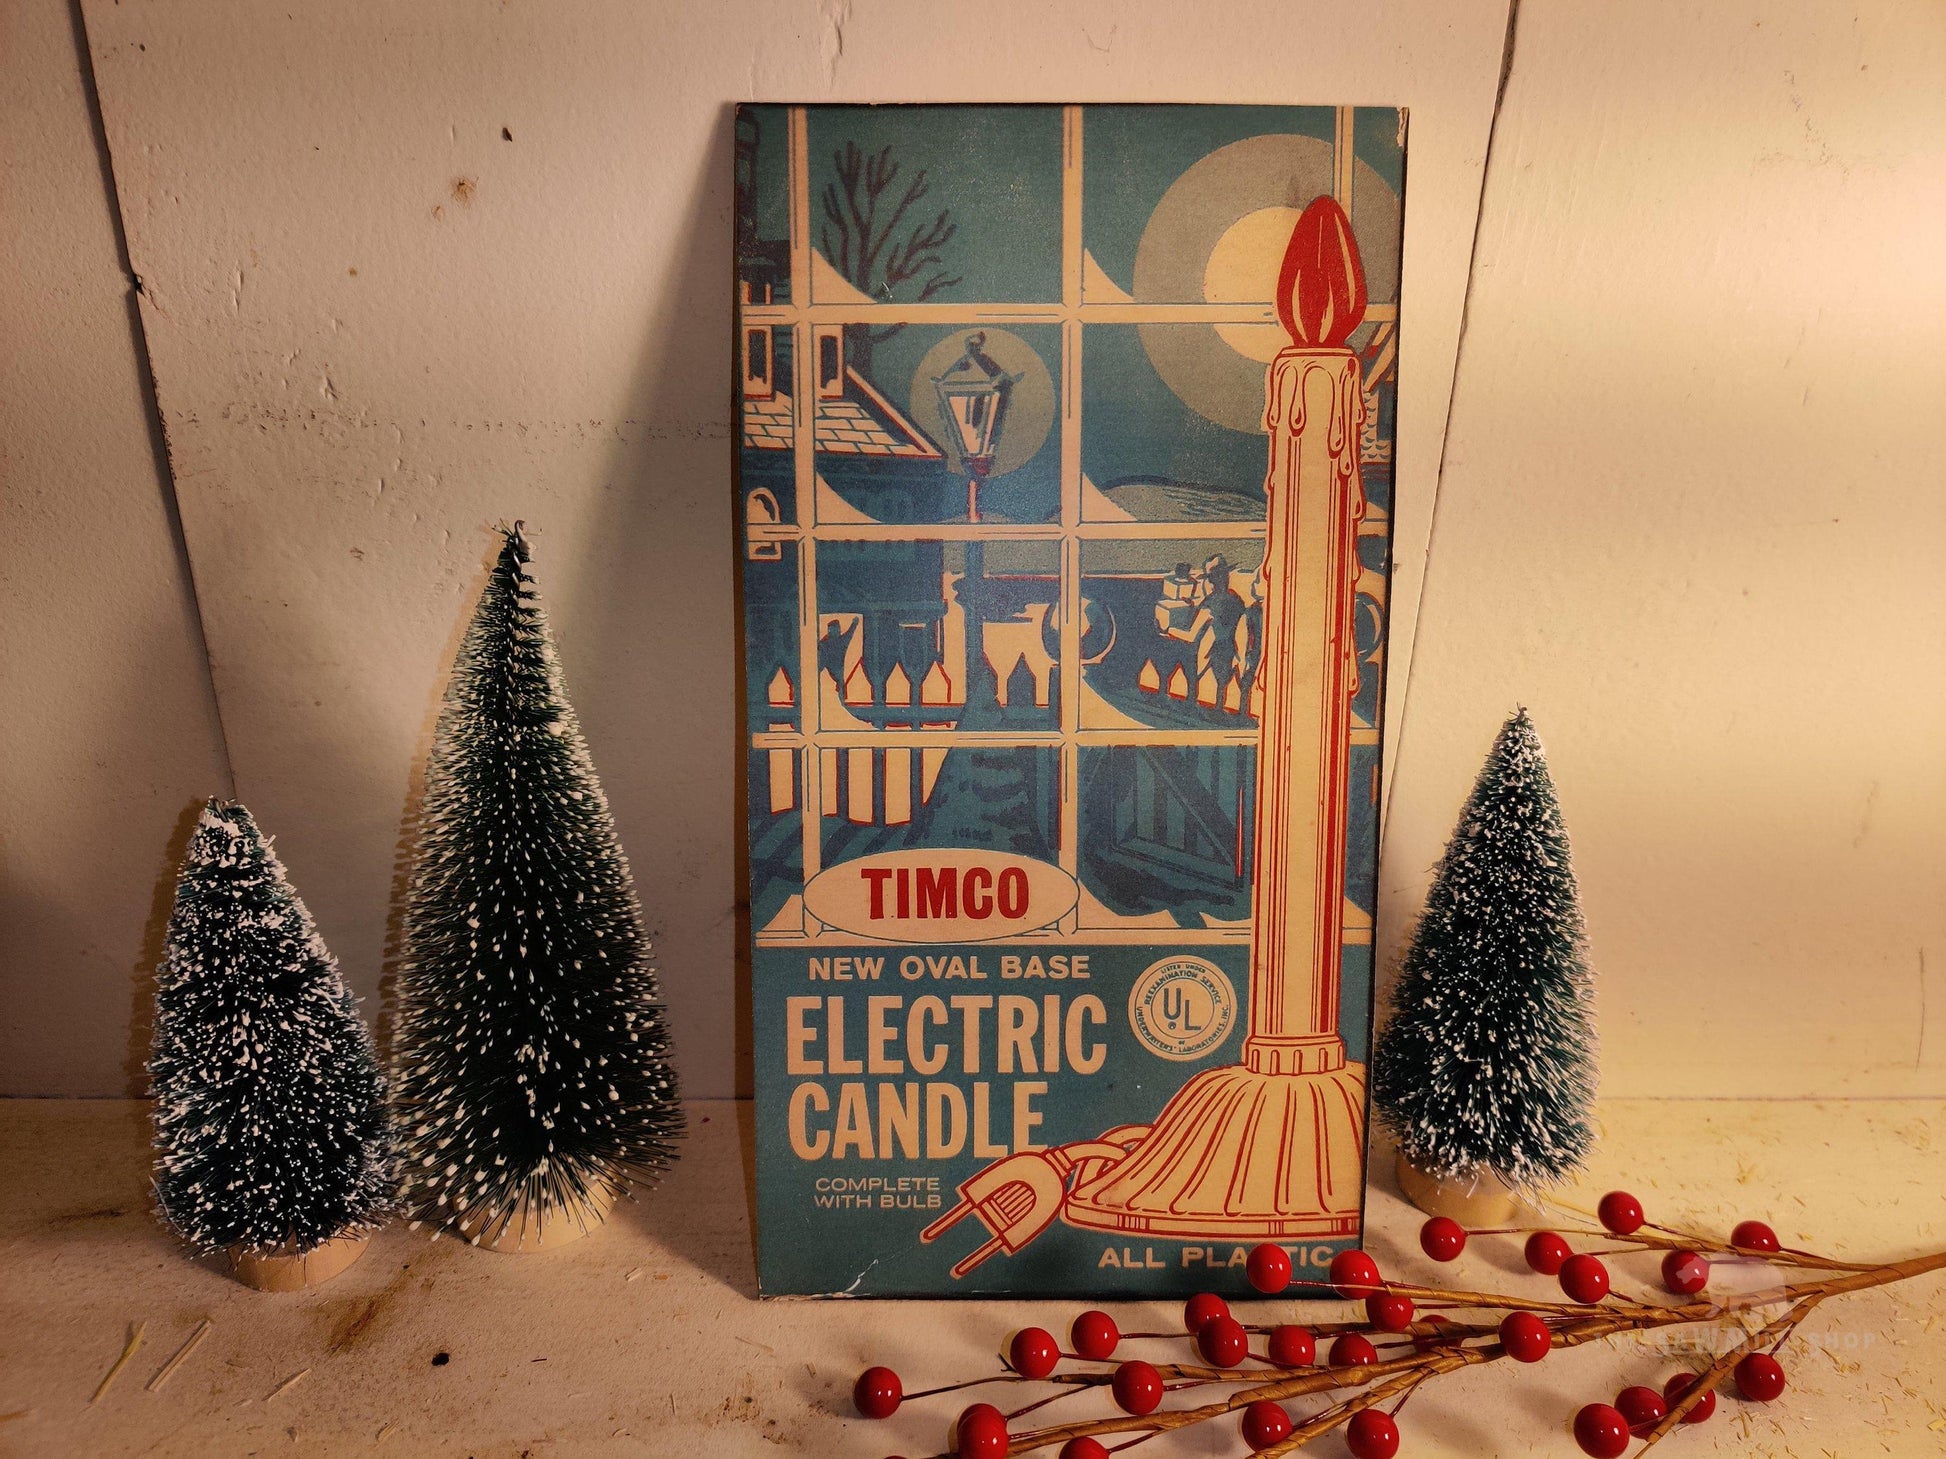 Timco Electric Candle Christmas Lights Box Artwork Wood Cutout-The Sawmill Shop